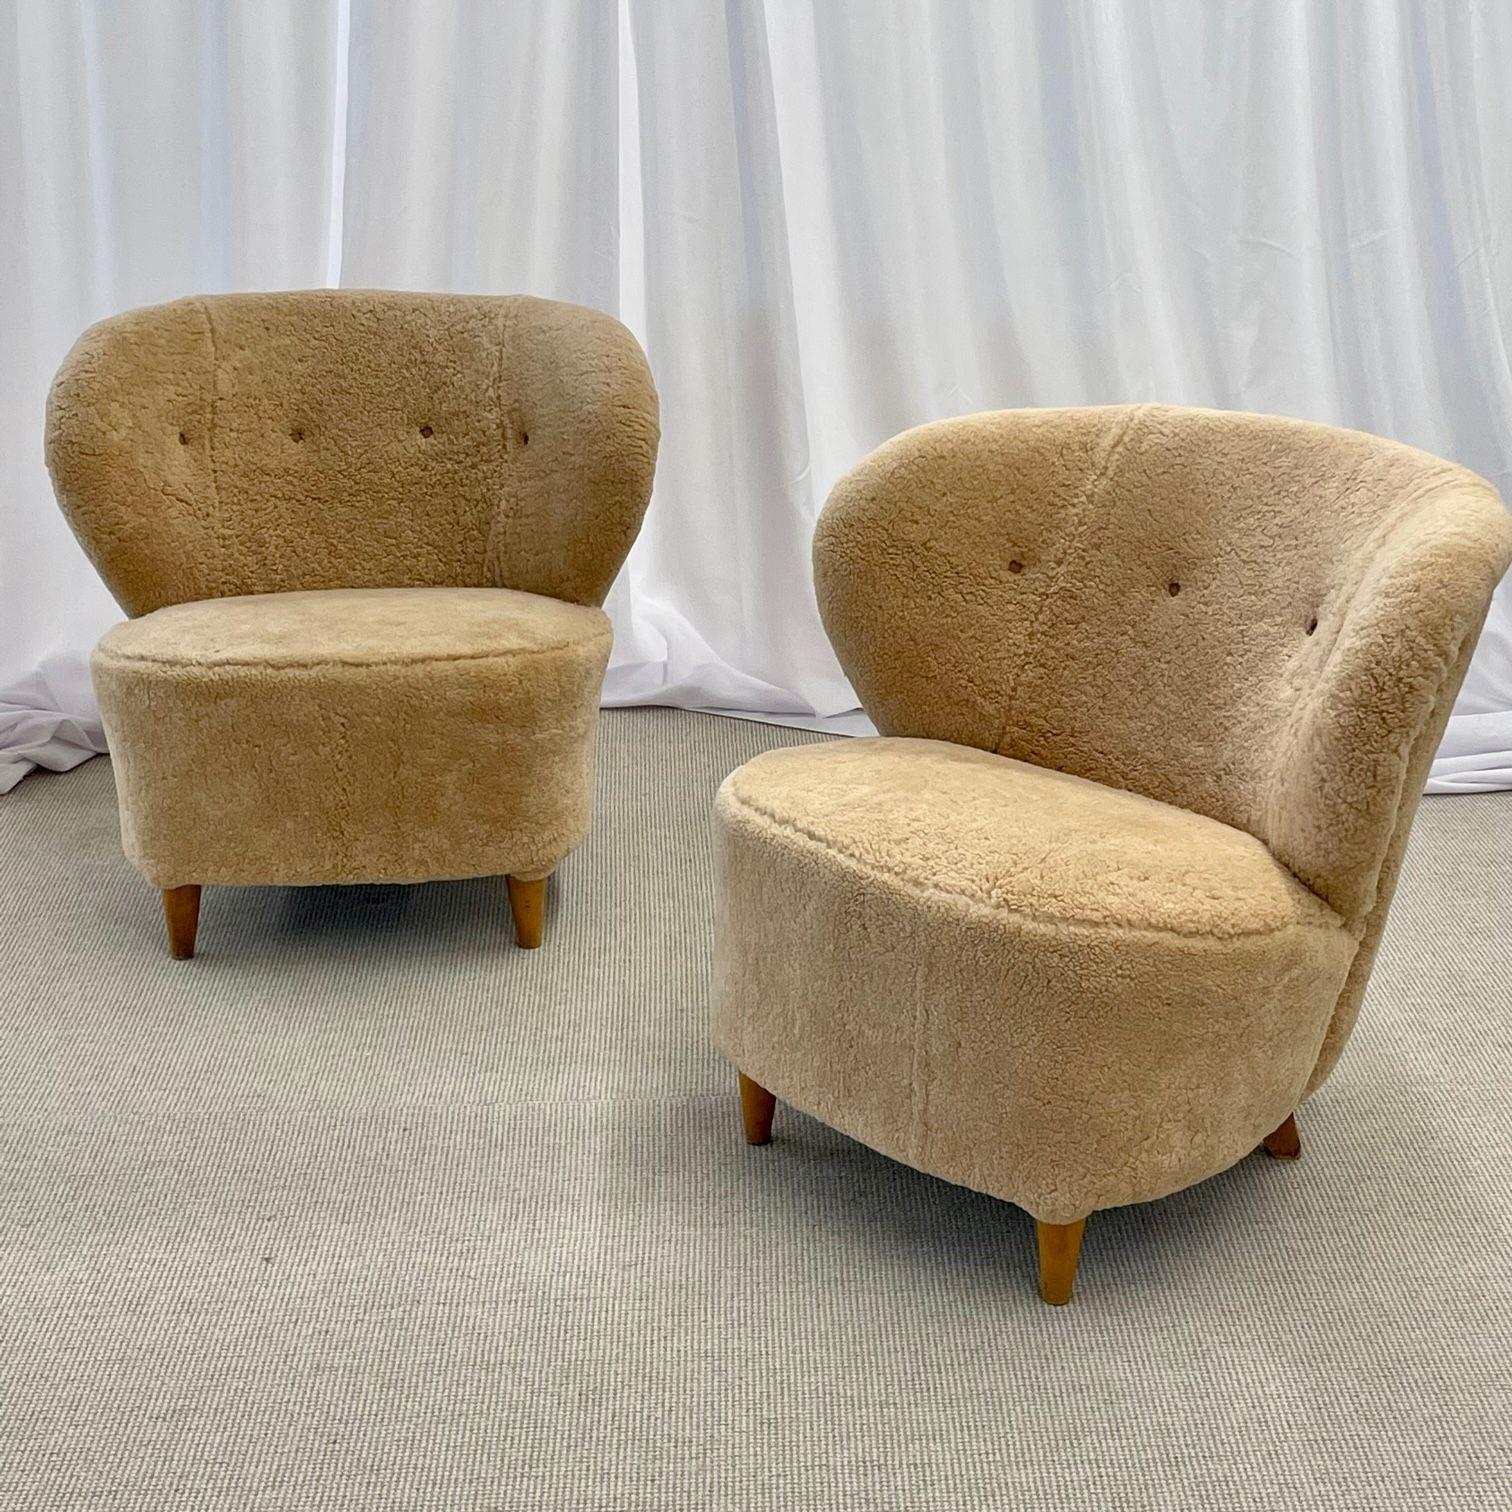 Pair of Mid-Century Modern Swedish lounge/slipper chairs, Sven Staaf, 1950s
 
Gorgeous pair of shearling Swedish modern lounge or slipper chairs. Newly upholstered in a chic honey sheepskin with new cushioning. Each chair sits on four lacquered